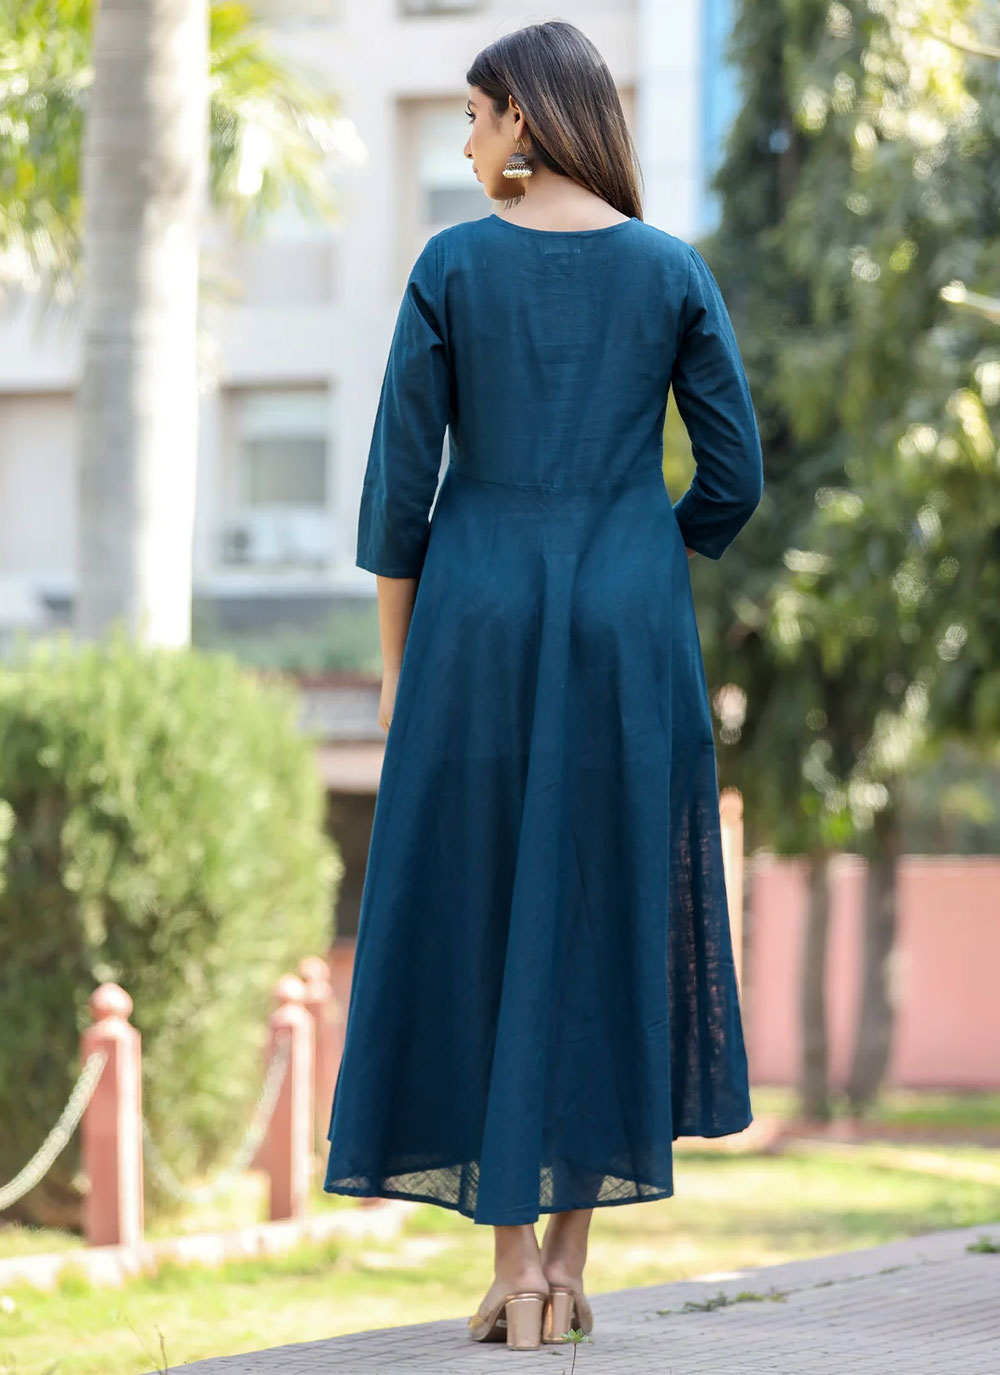 Cotton Party Wear Kurti In Peacock Blue Color